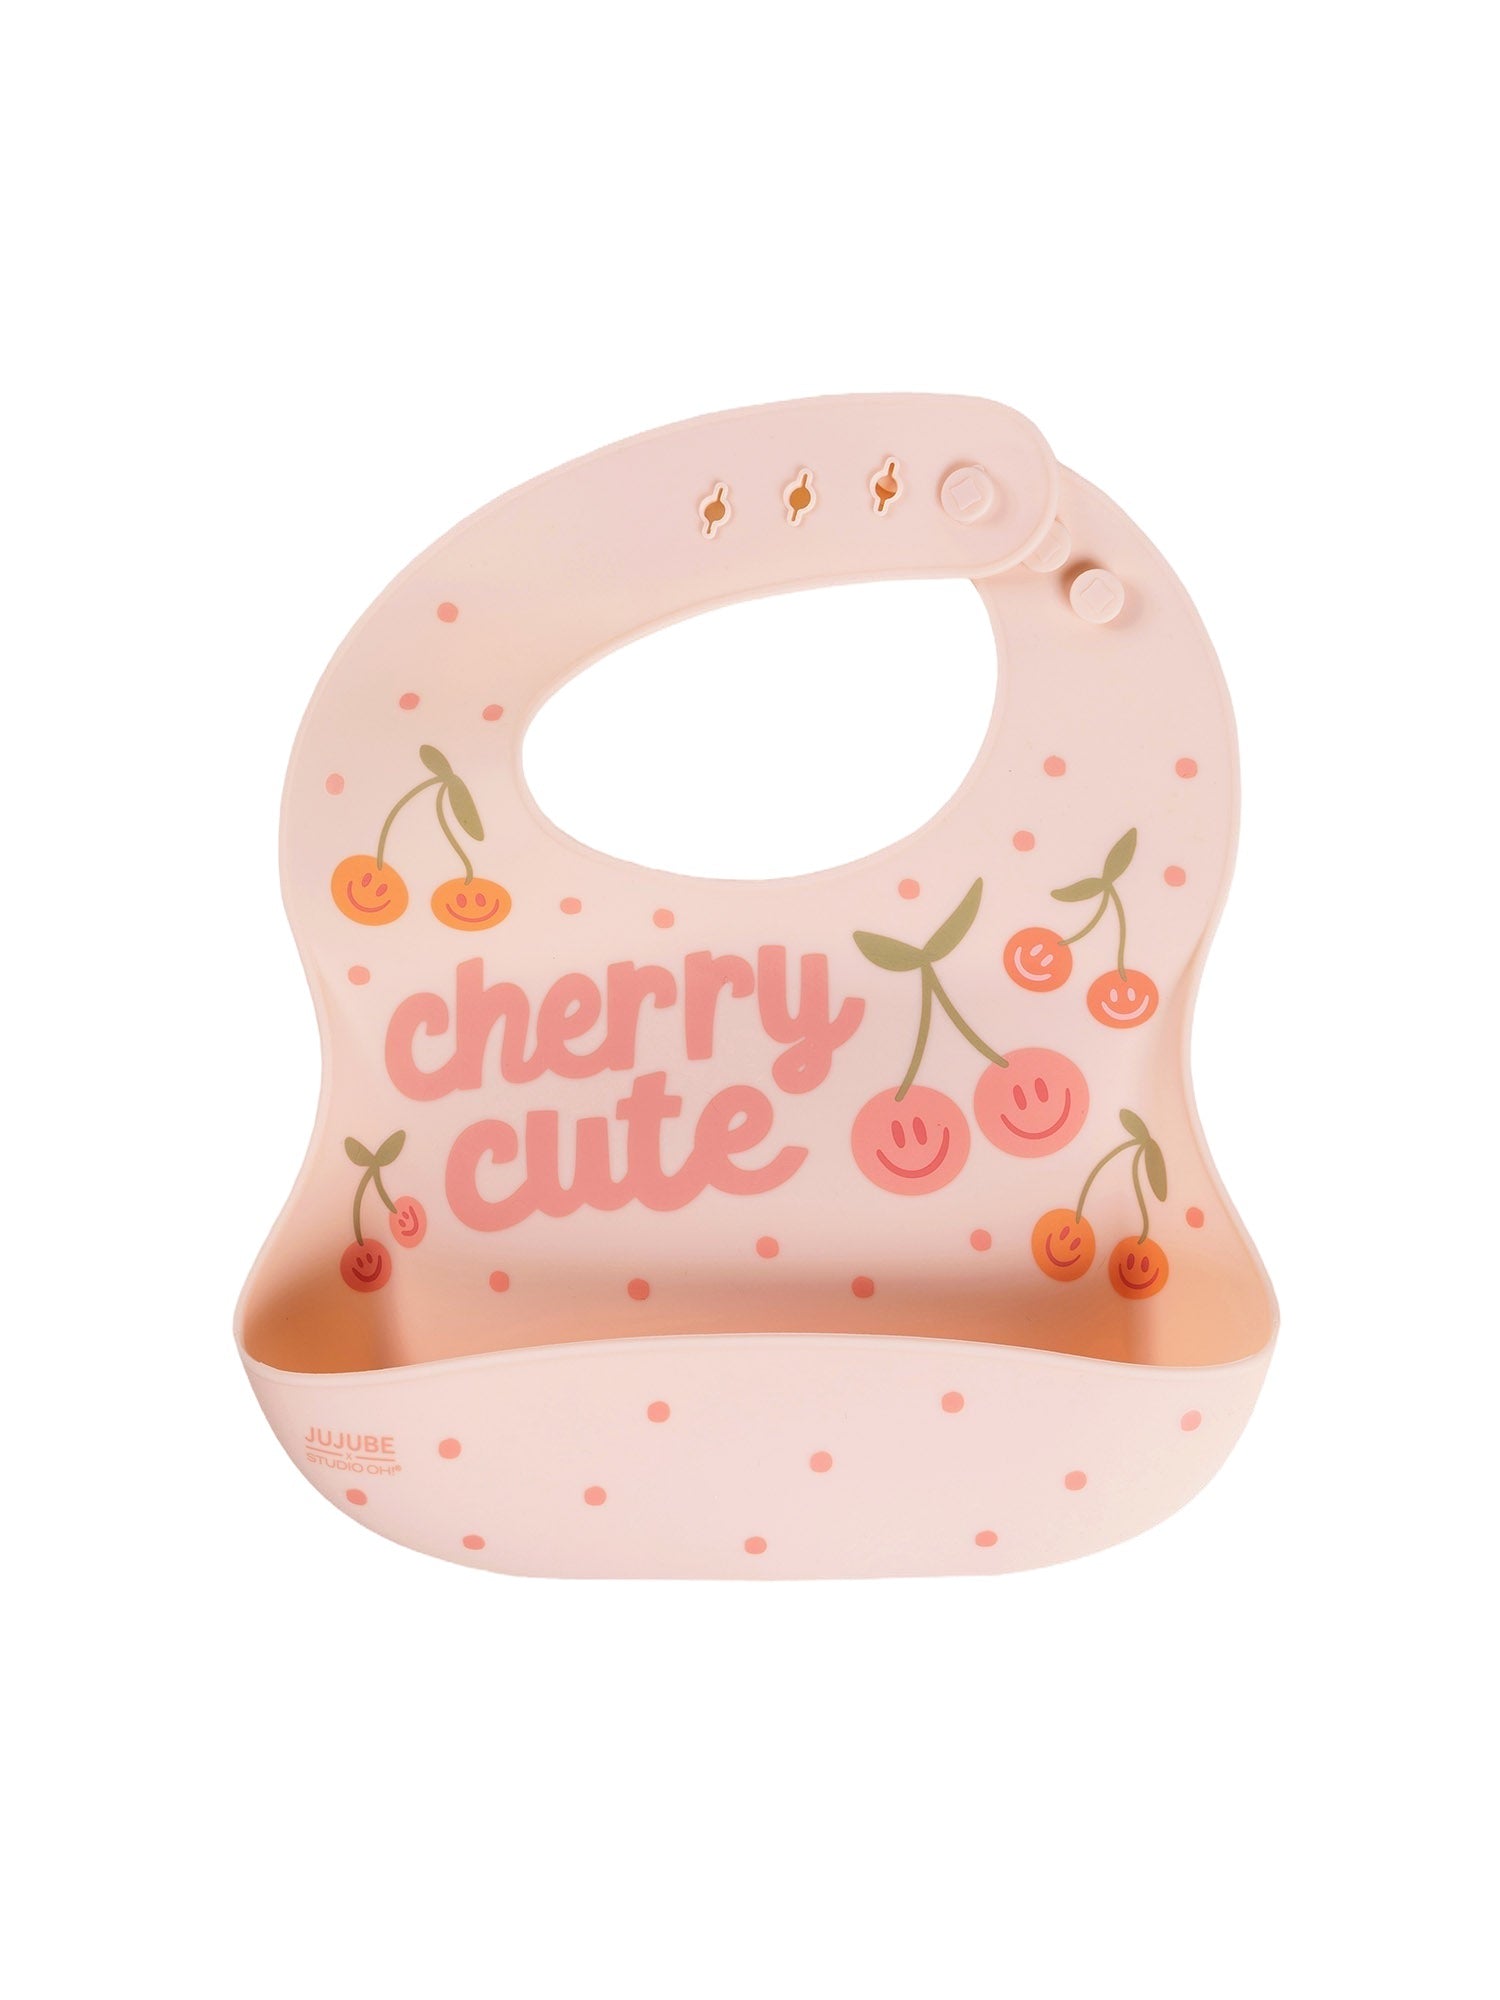 Silicone Bib - Cherry Cute By Doodle By Meg